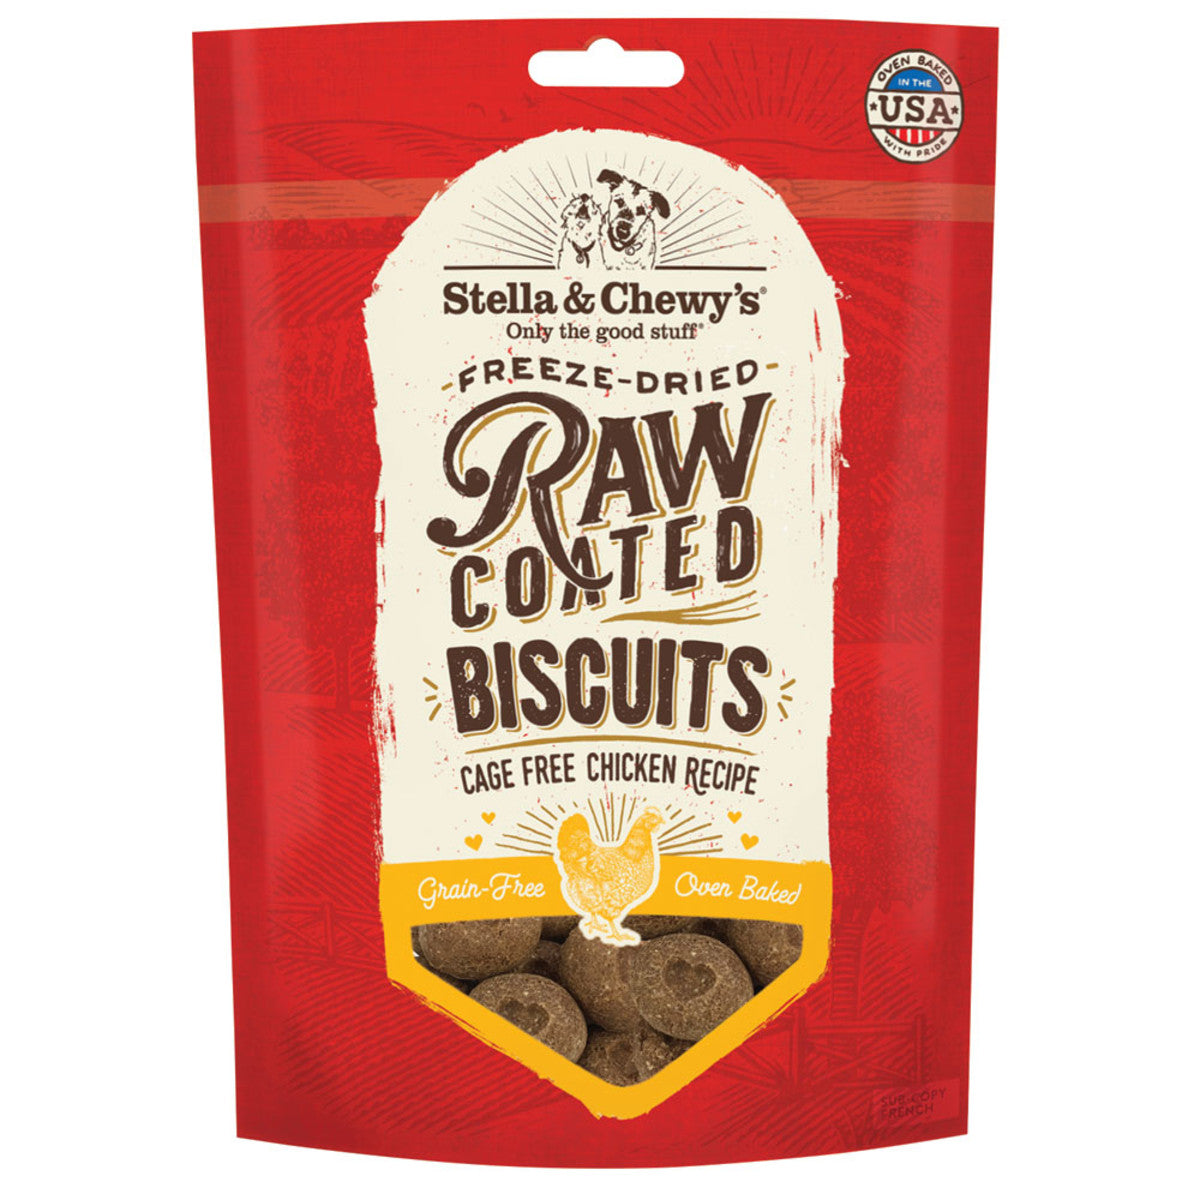 Stella & Chewy's Raw Coated Biscuits Cage Free Chicken Dog Food